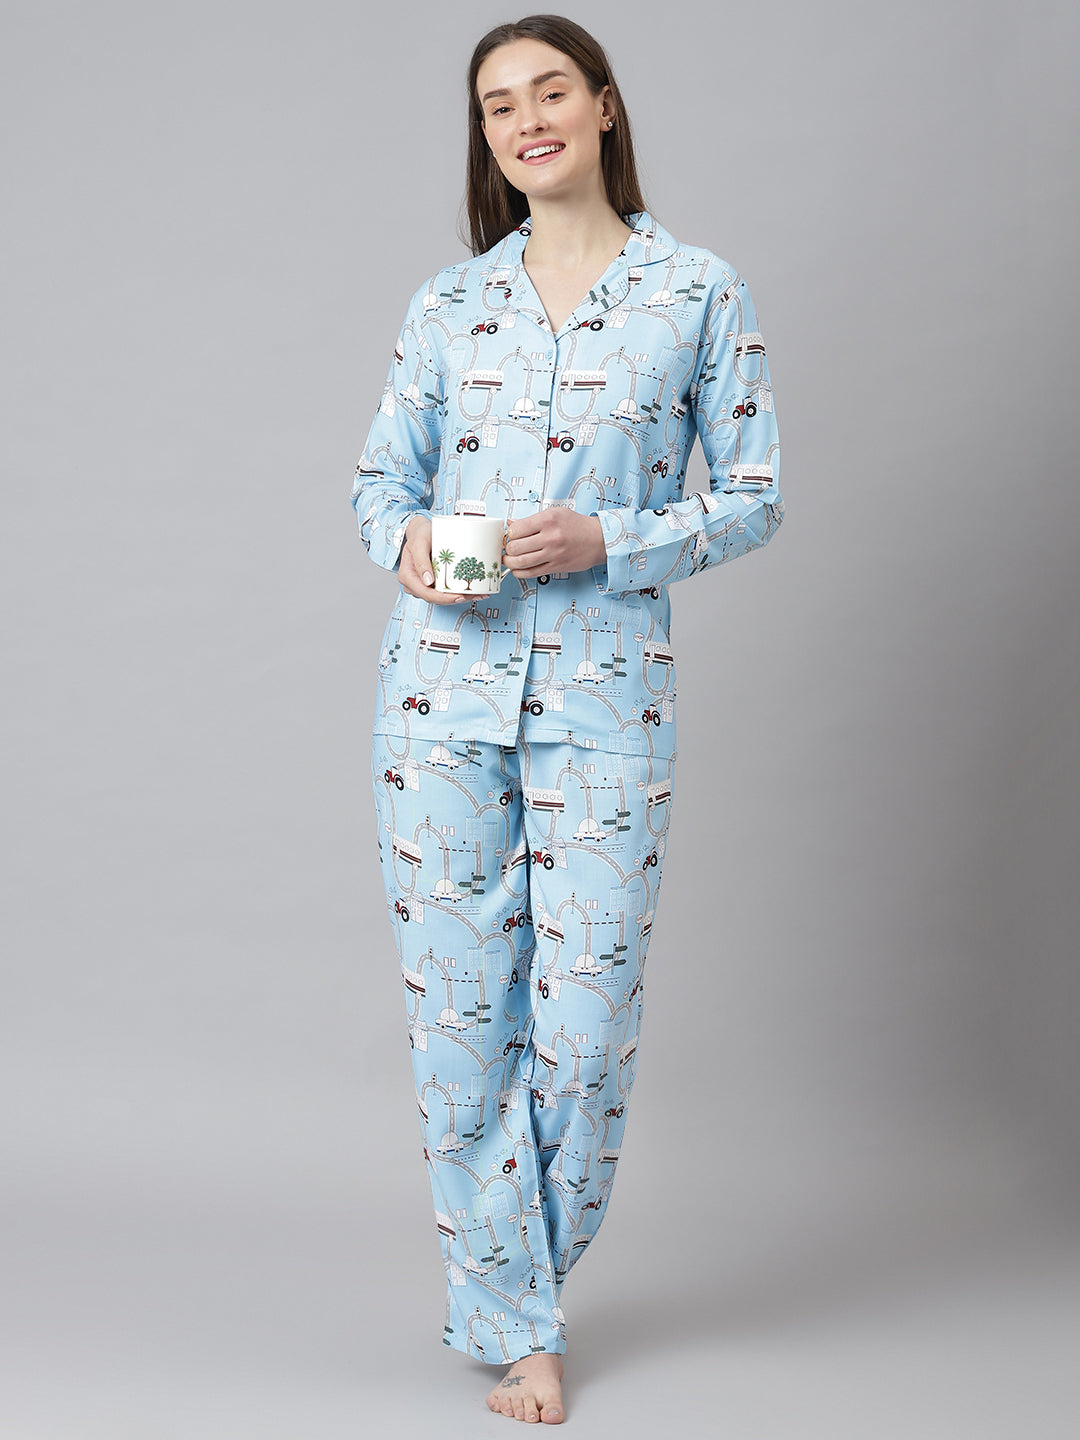 Cation Blue Printed Night Suit